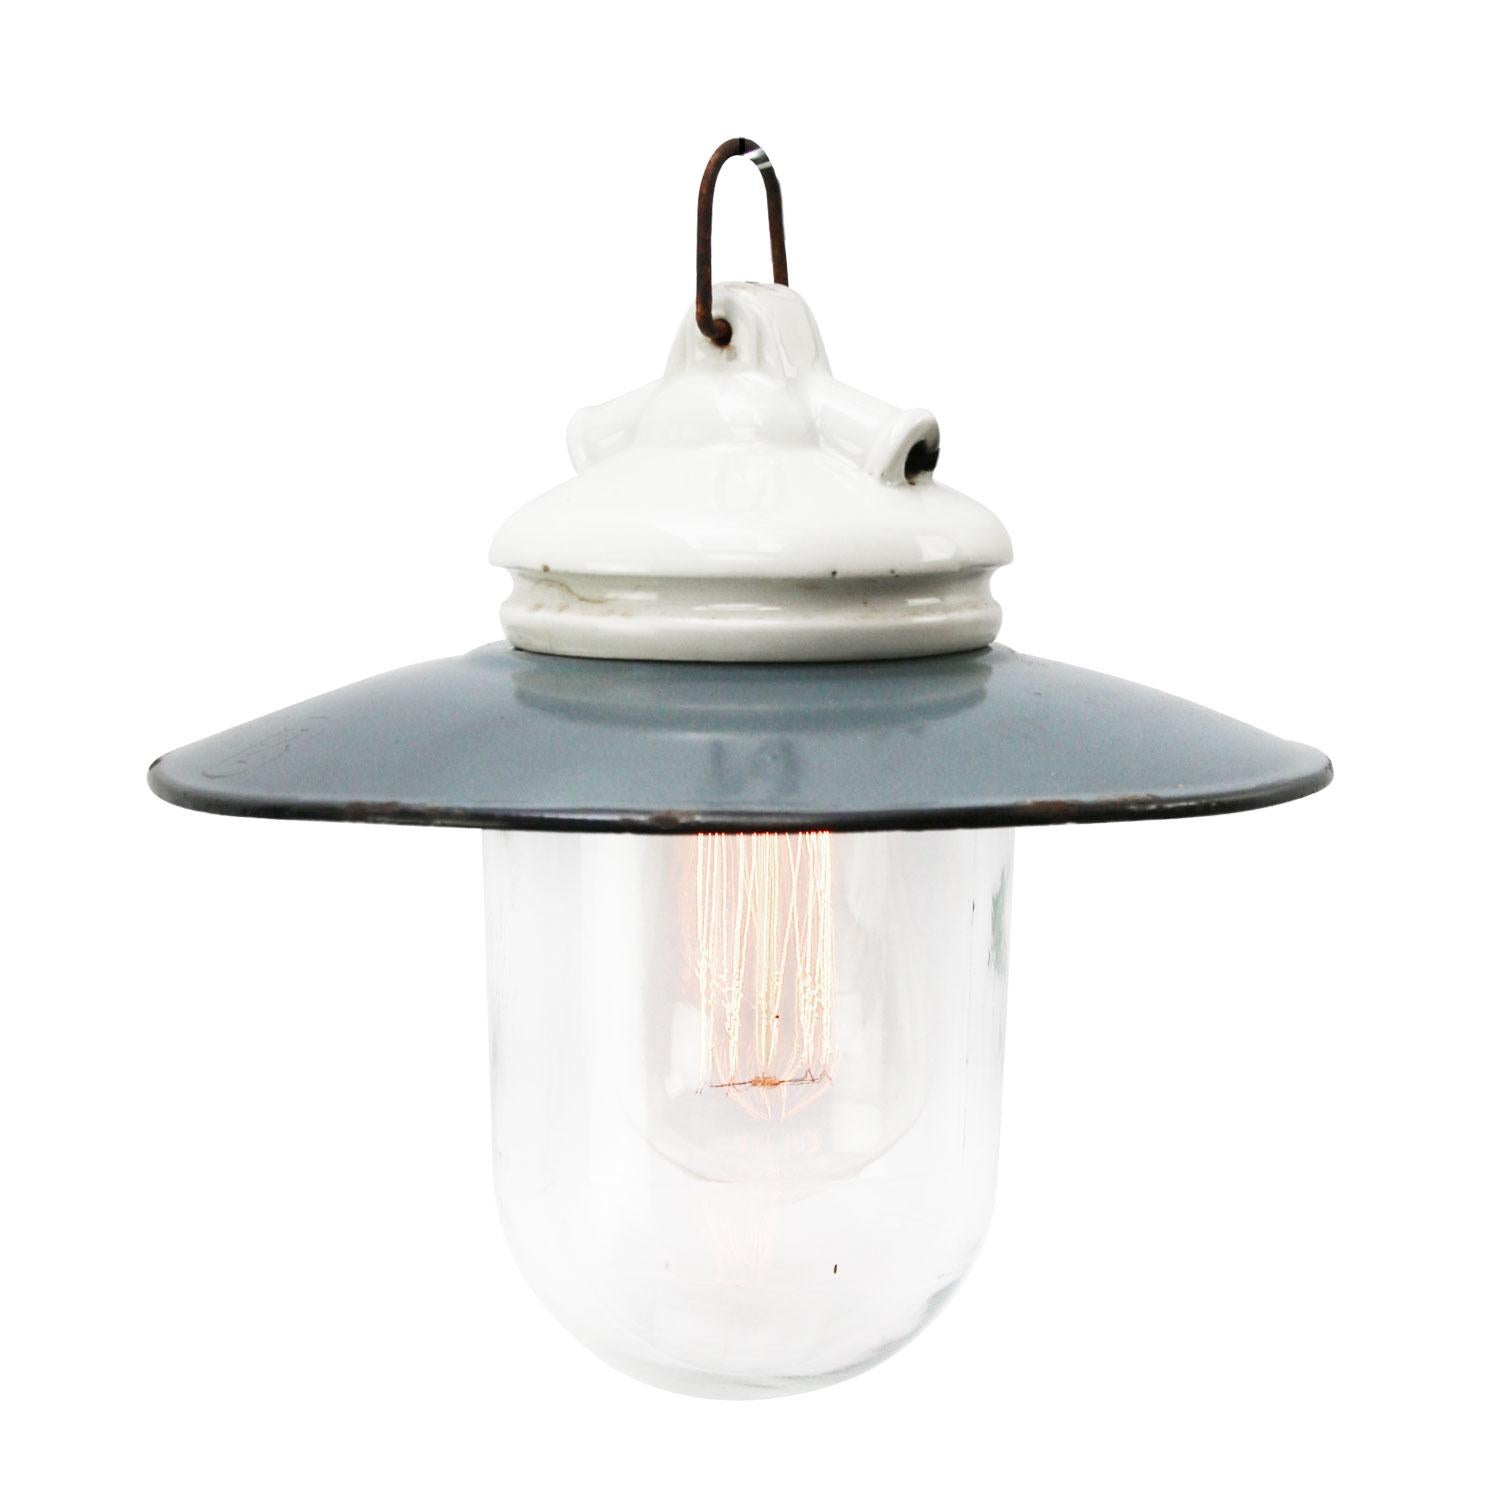 Porcelain industrial hanging lamp.
White porcelain and clear glass.
Blue enamel shade
2 conductors, no ground.

Weight: 1.00 kg / 2.2 lb

Priced per individual item. All lamps are suitable for incandescent light bulbs, energy-efficient and